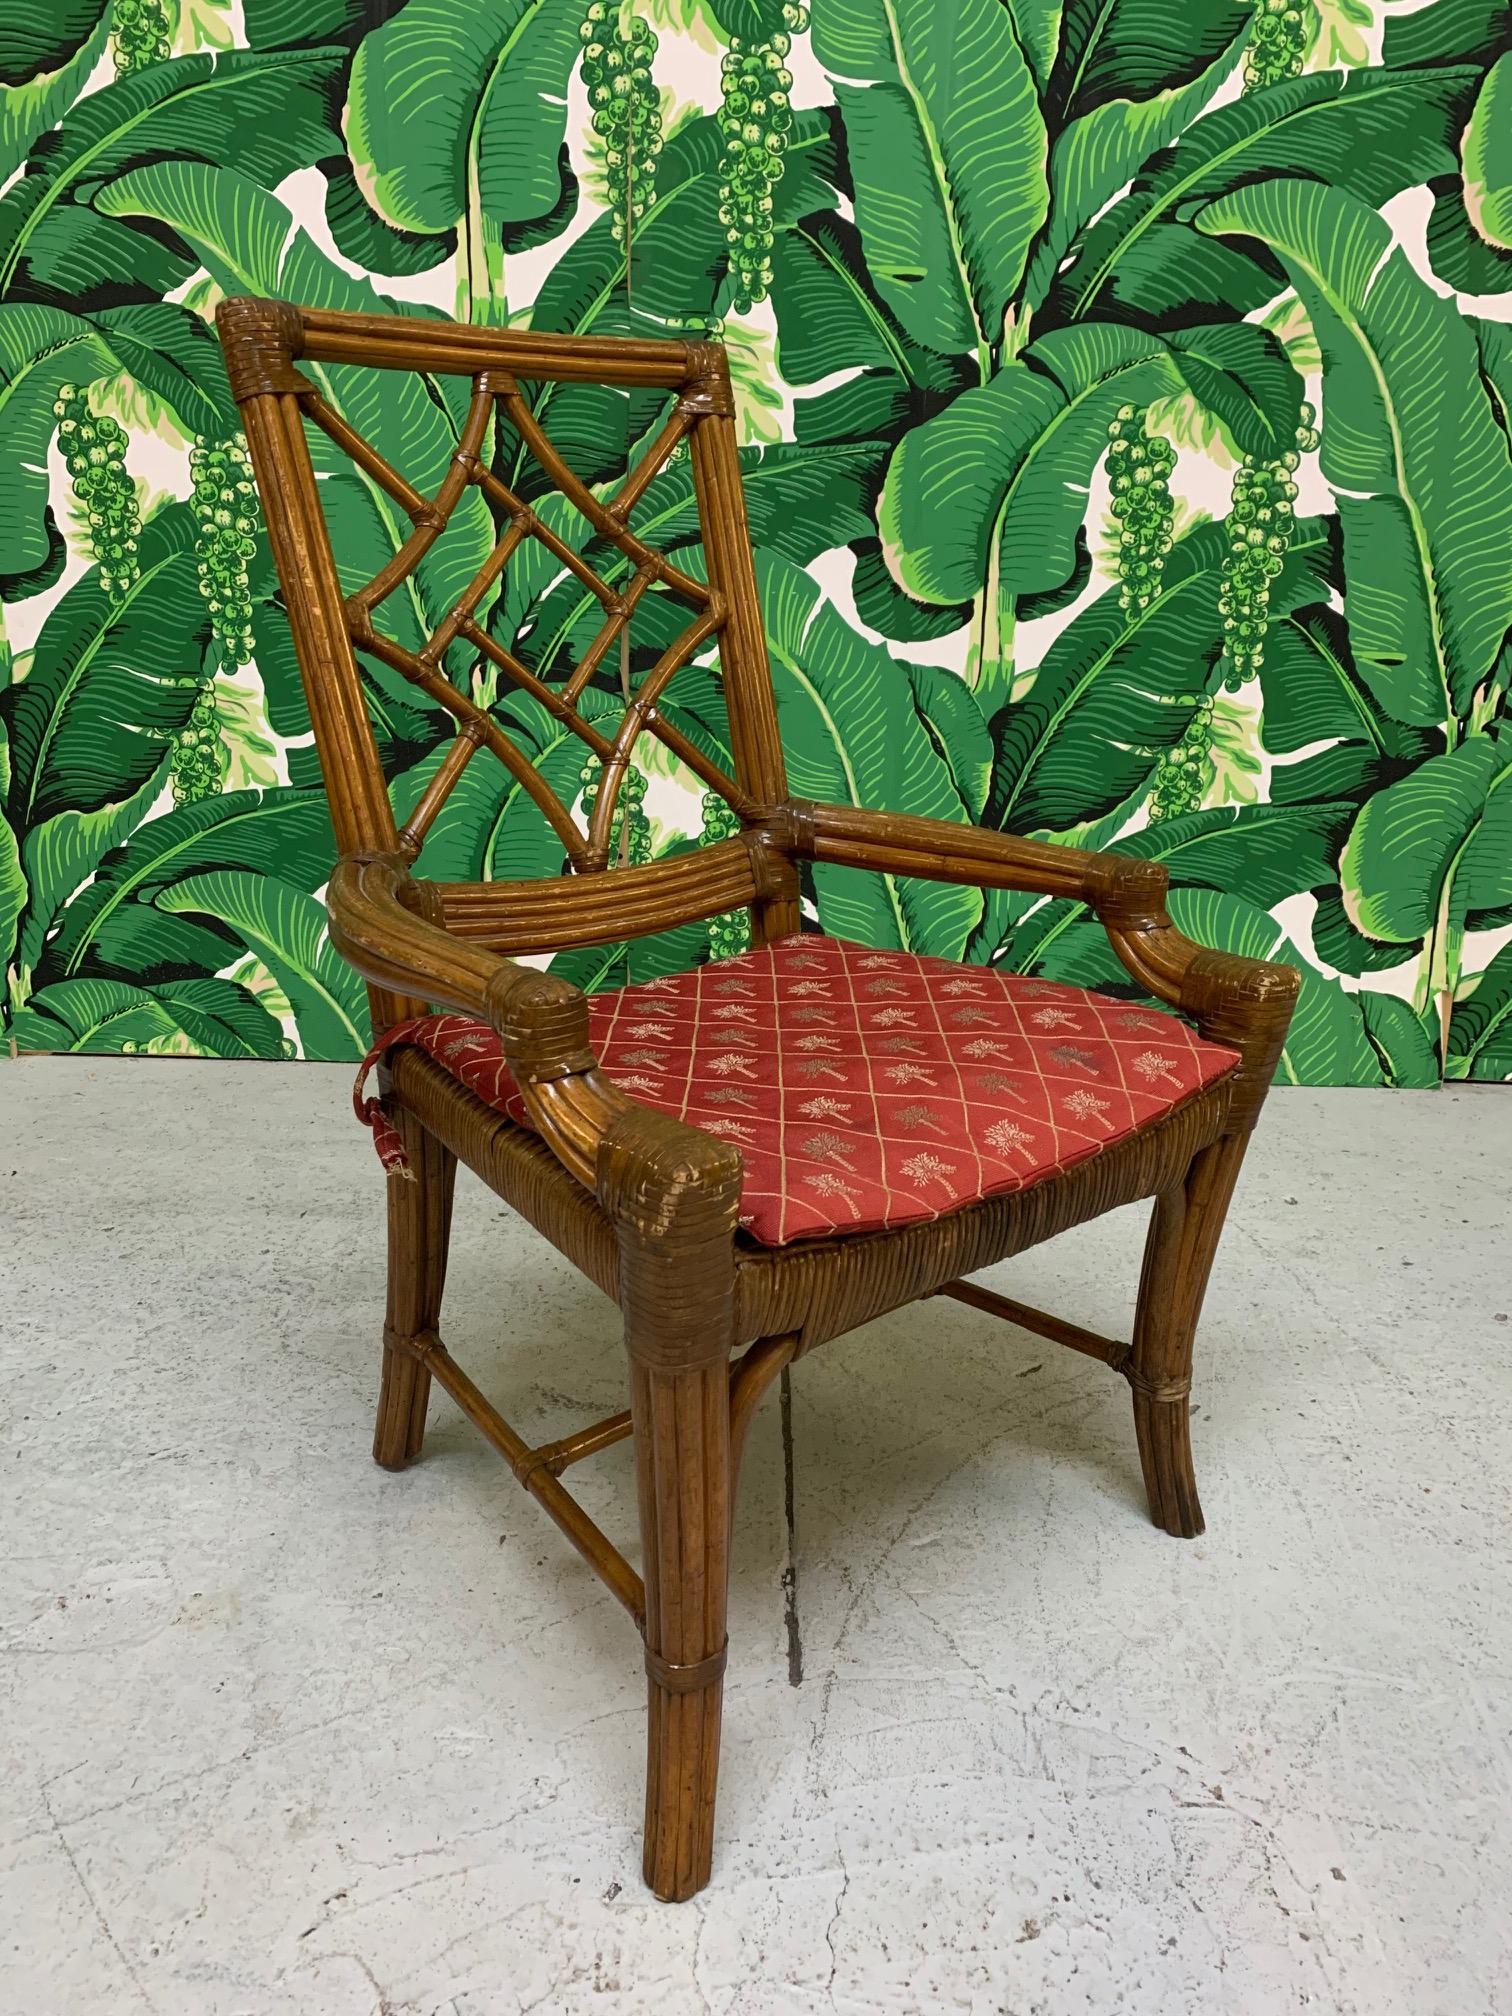 Set of 6 rattan cockpen dining chairs feature wicker seats and leather wrapped joints. Seat cushions in a deep red with palm tree design. Good condition structurally and cosmetically showing marks consistent with age and use. See photos for